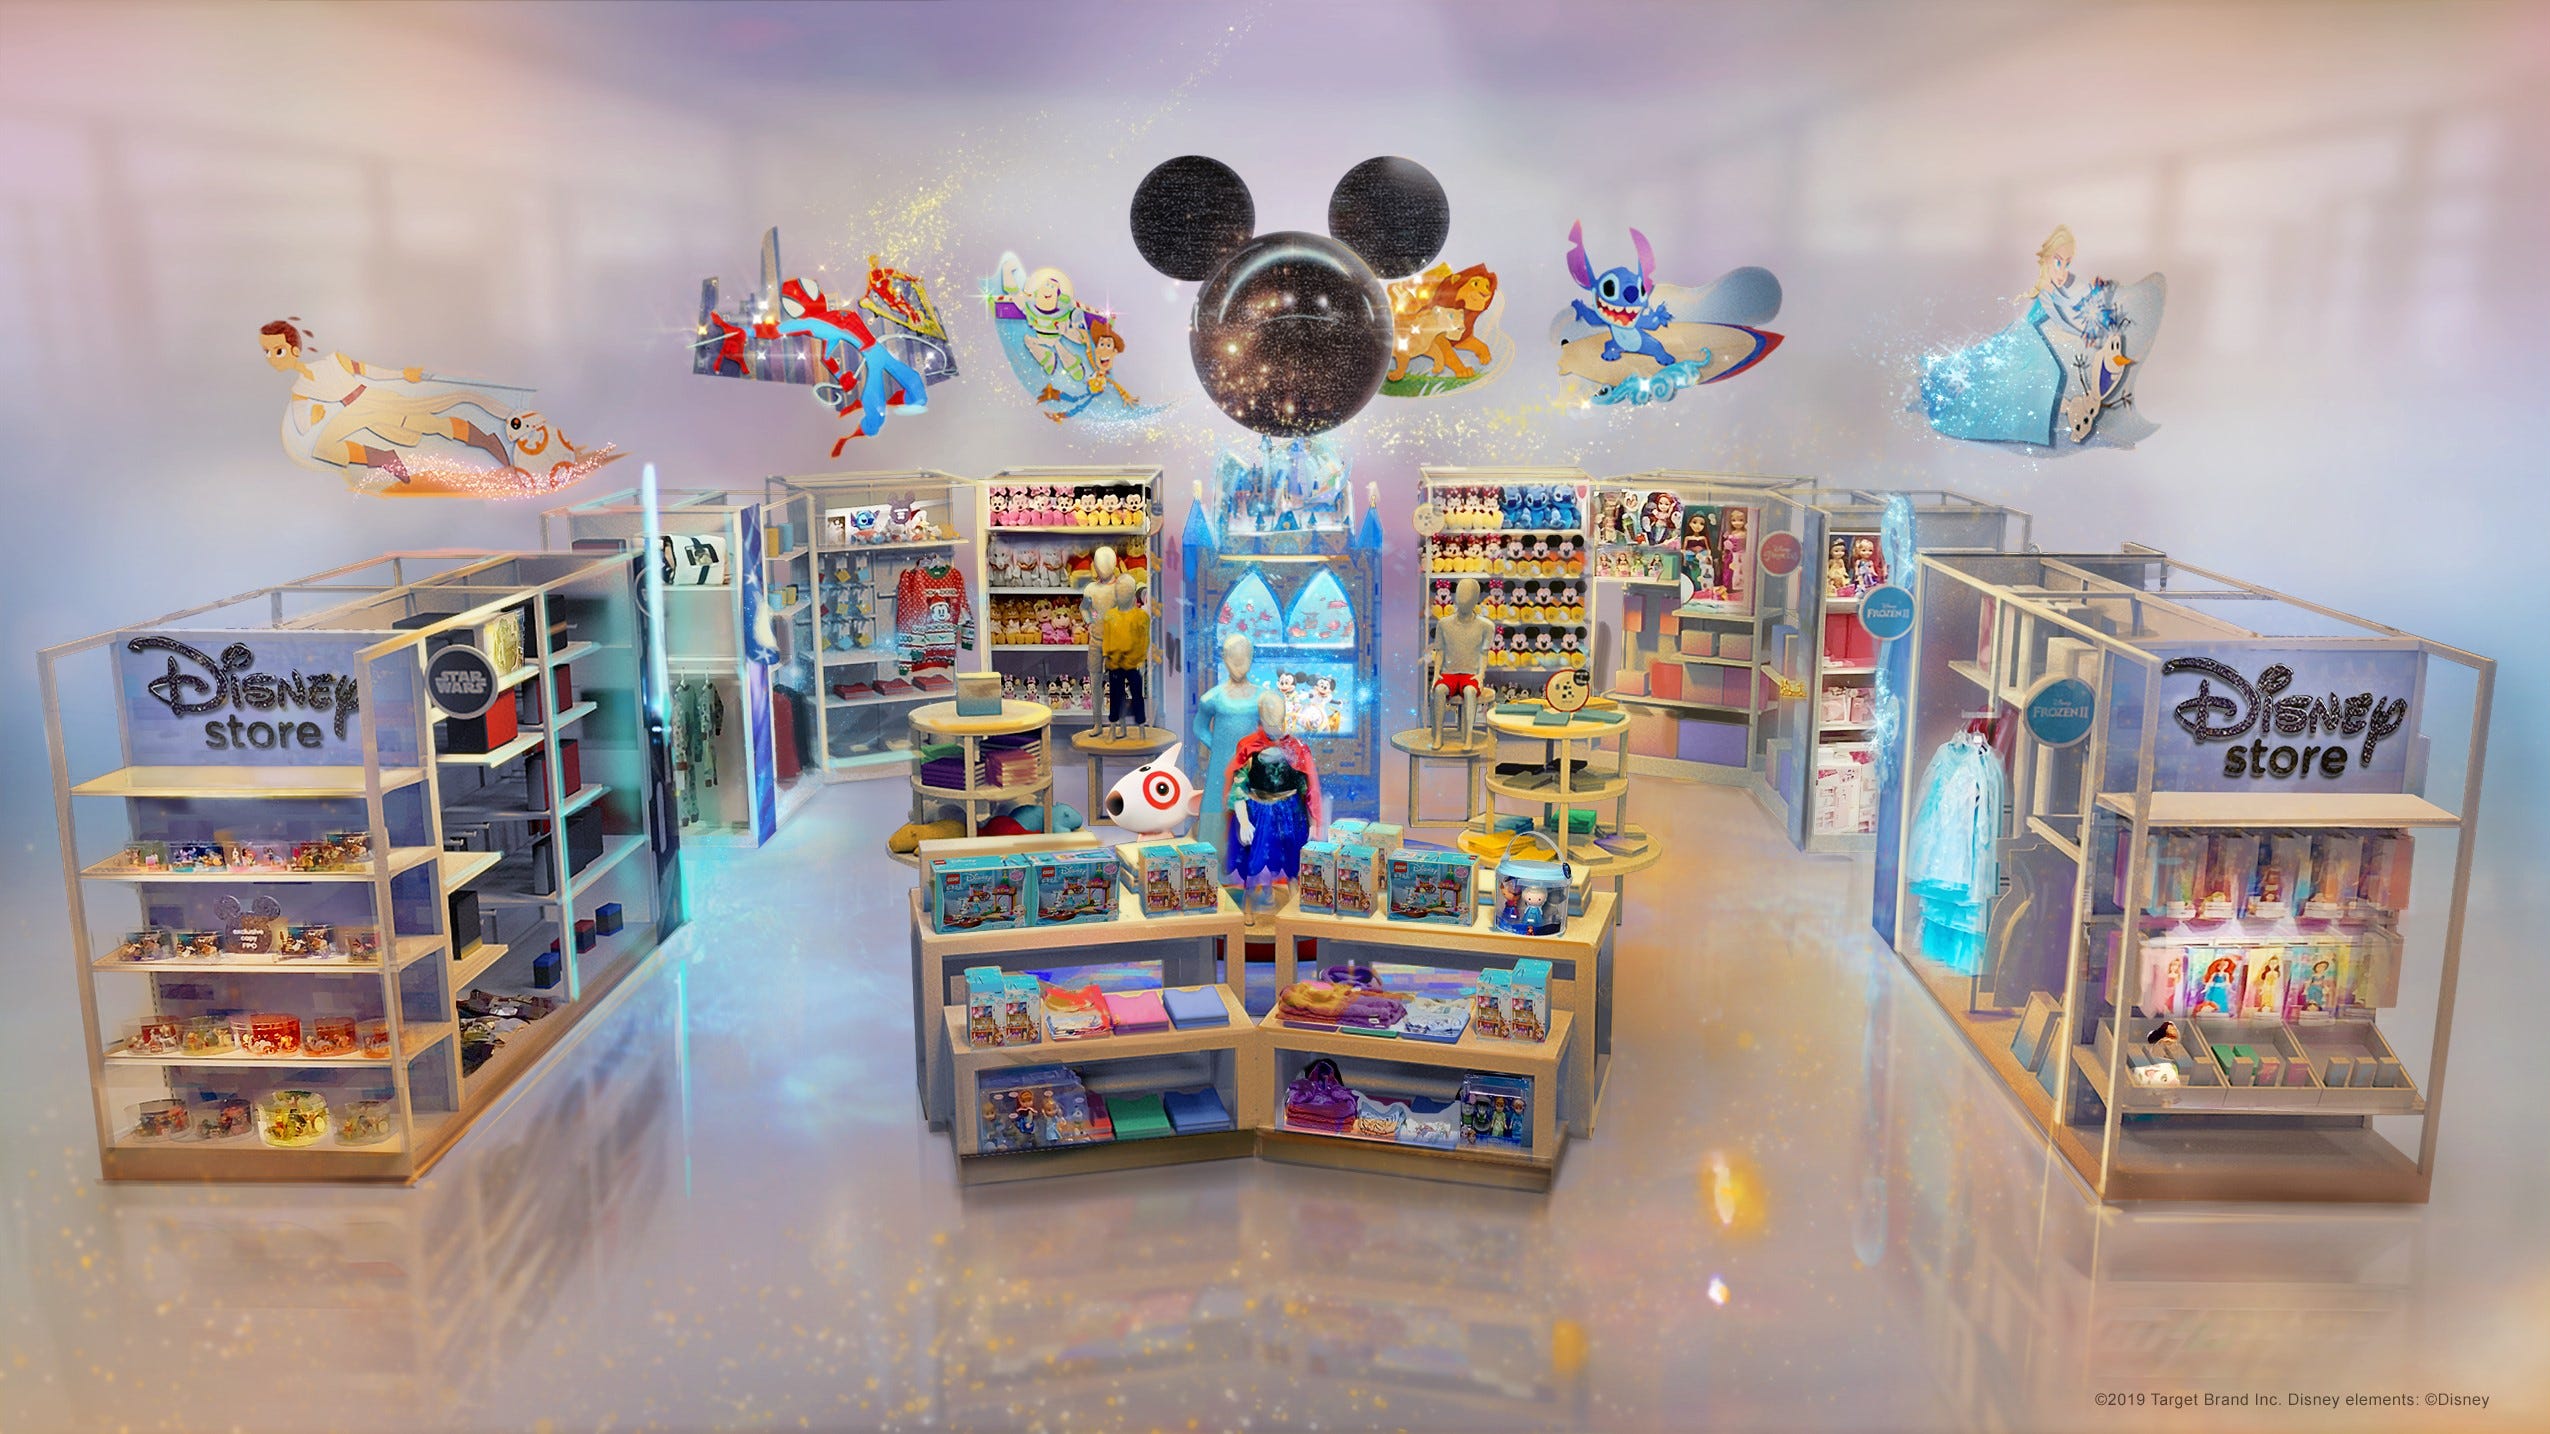 Target Disney: location near you may get Disney store in it